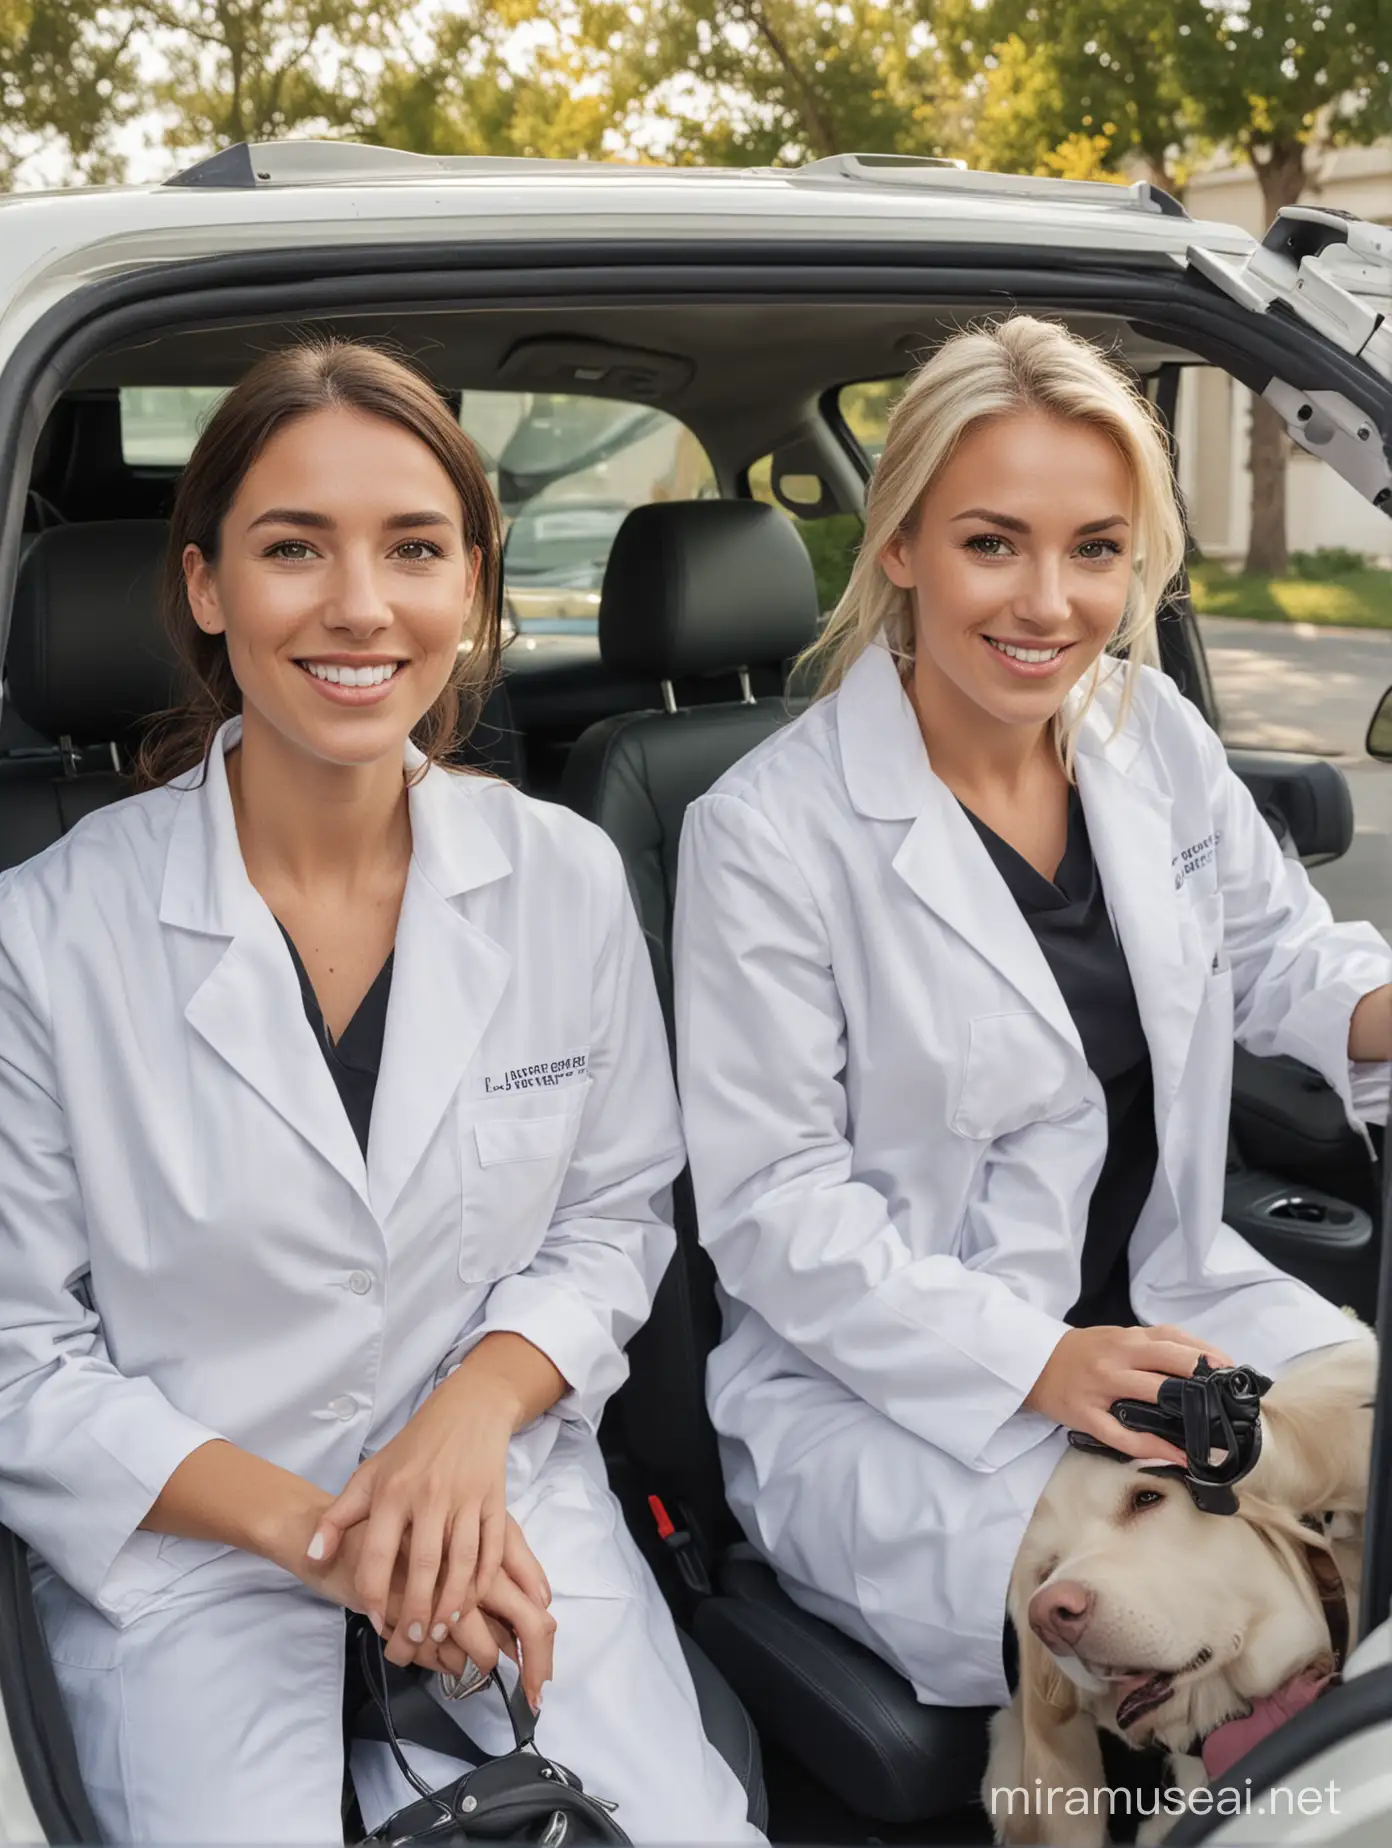 Two caucasian women wearing white lab coats in fron seat of carin front seat of car